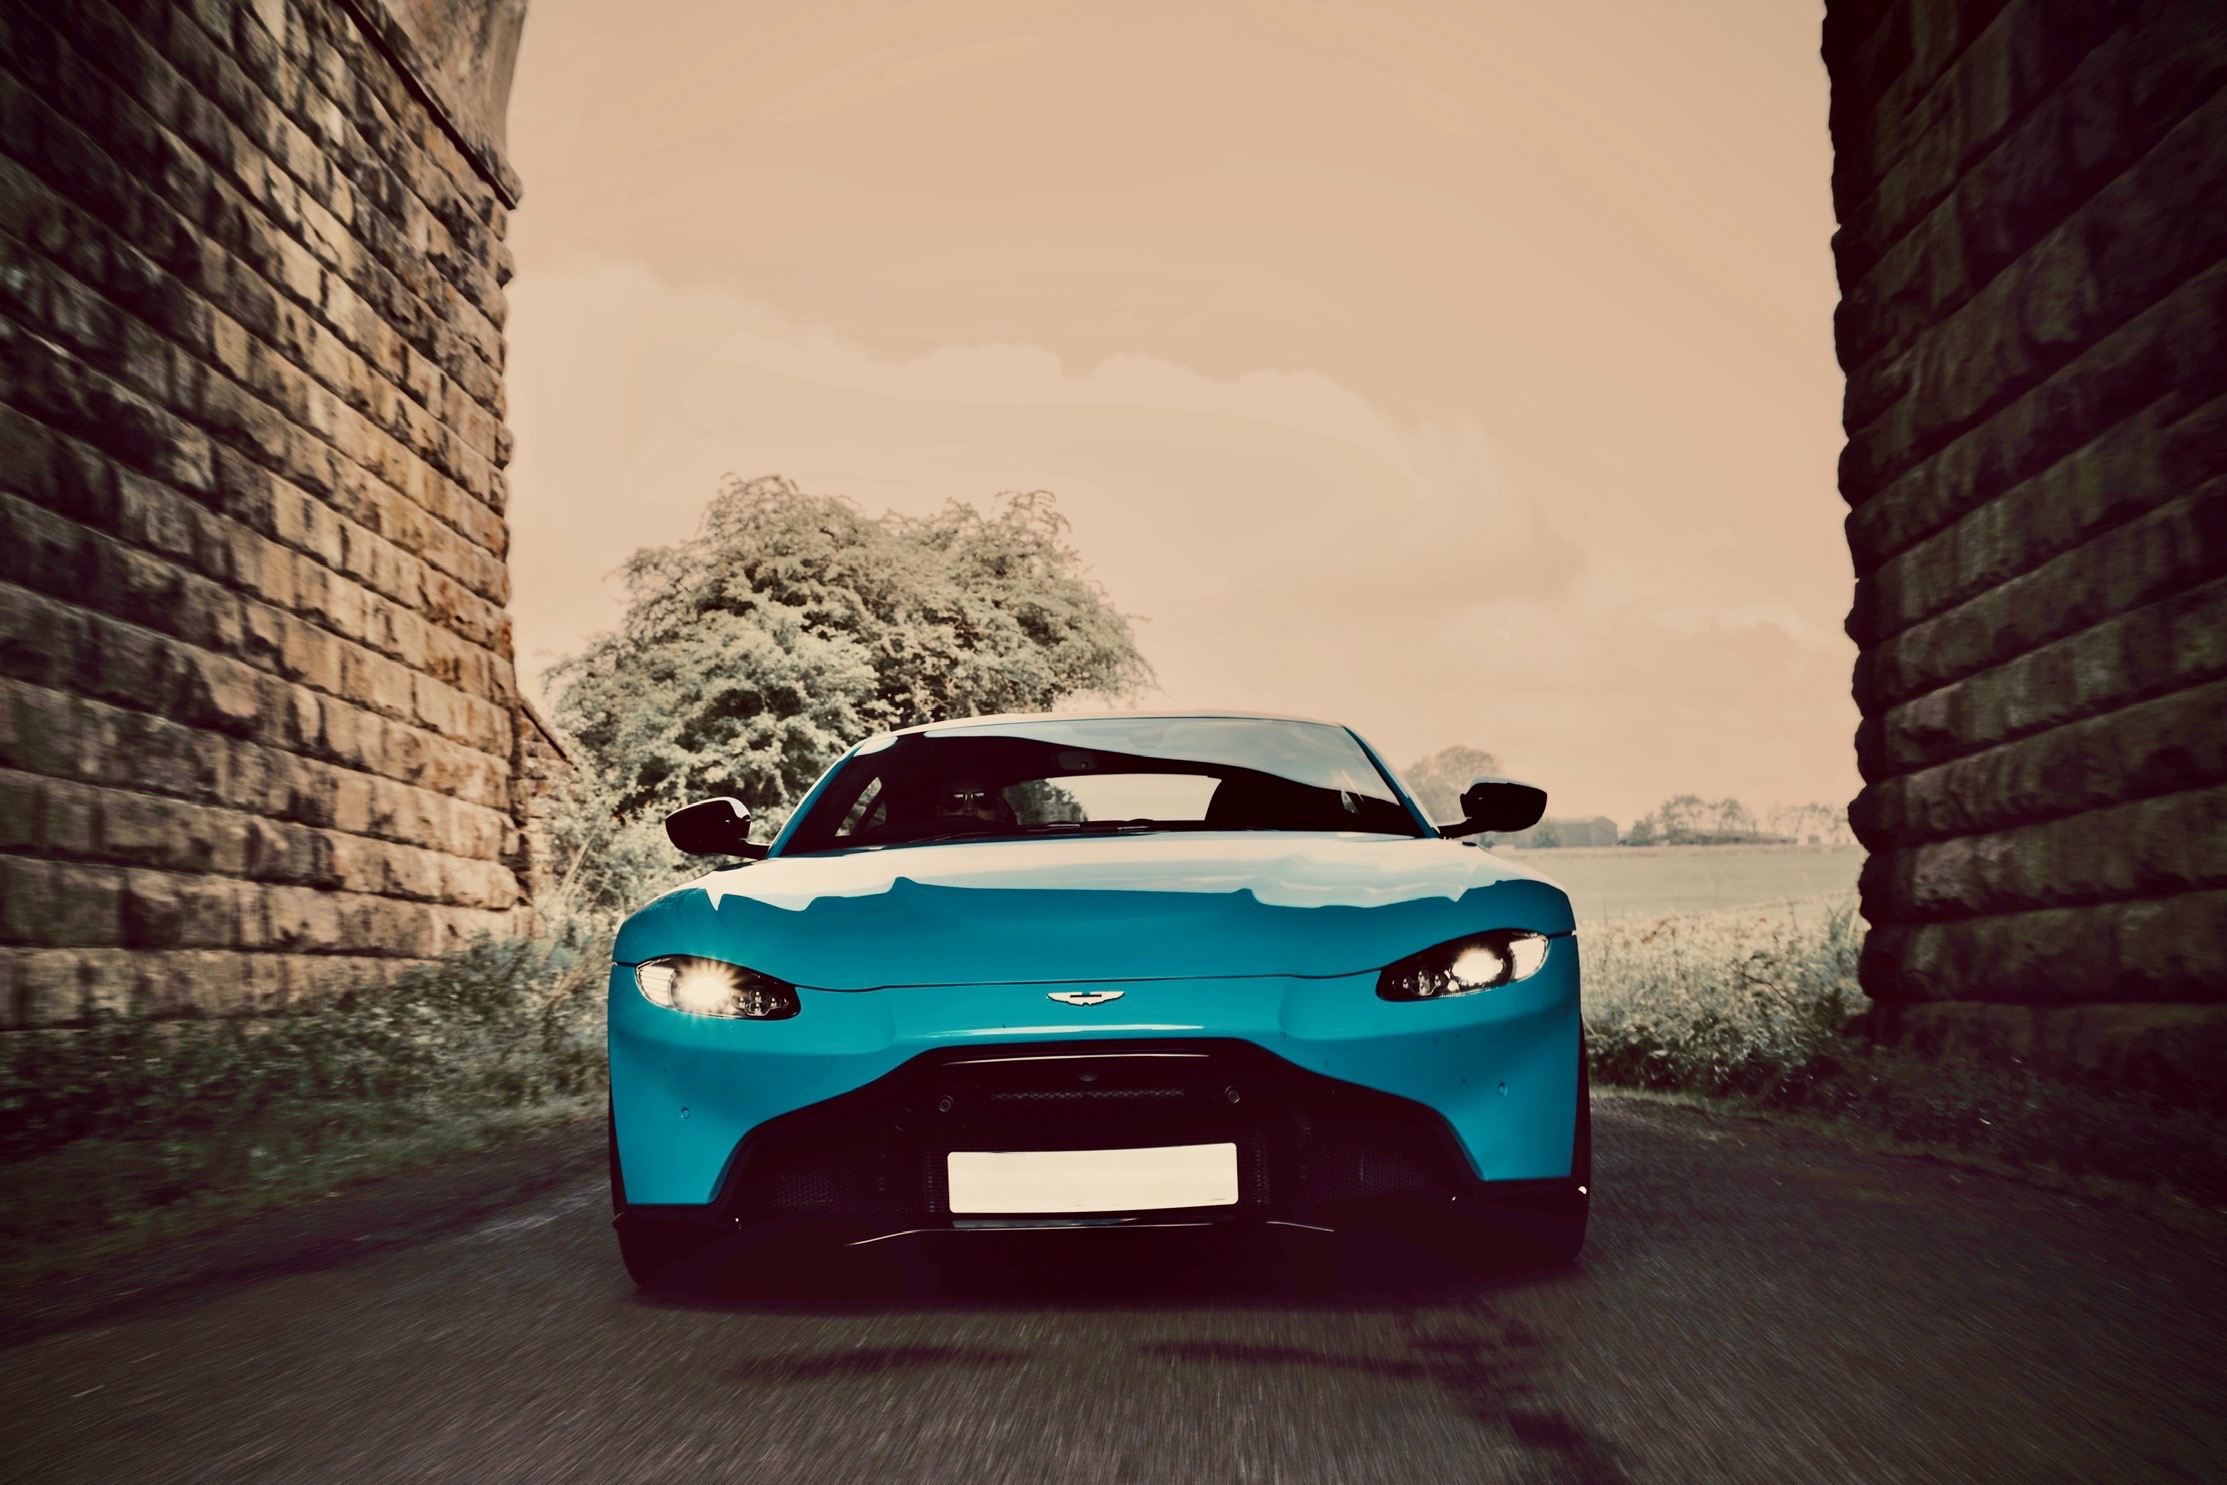 So what have you done with your Aston today? (Vol. 2) - Page 34 - Aston Martin - PistonHeads